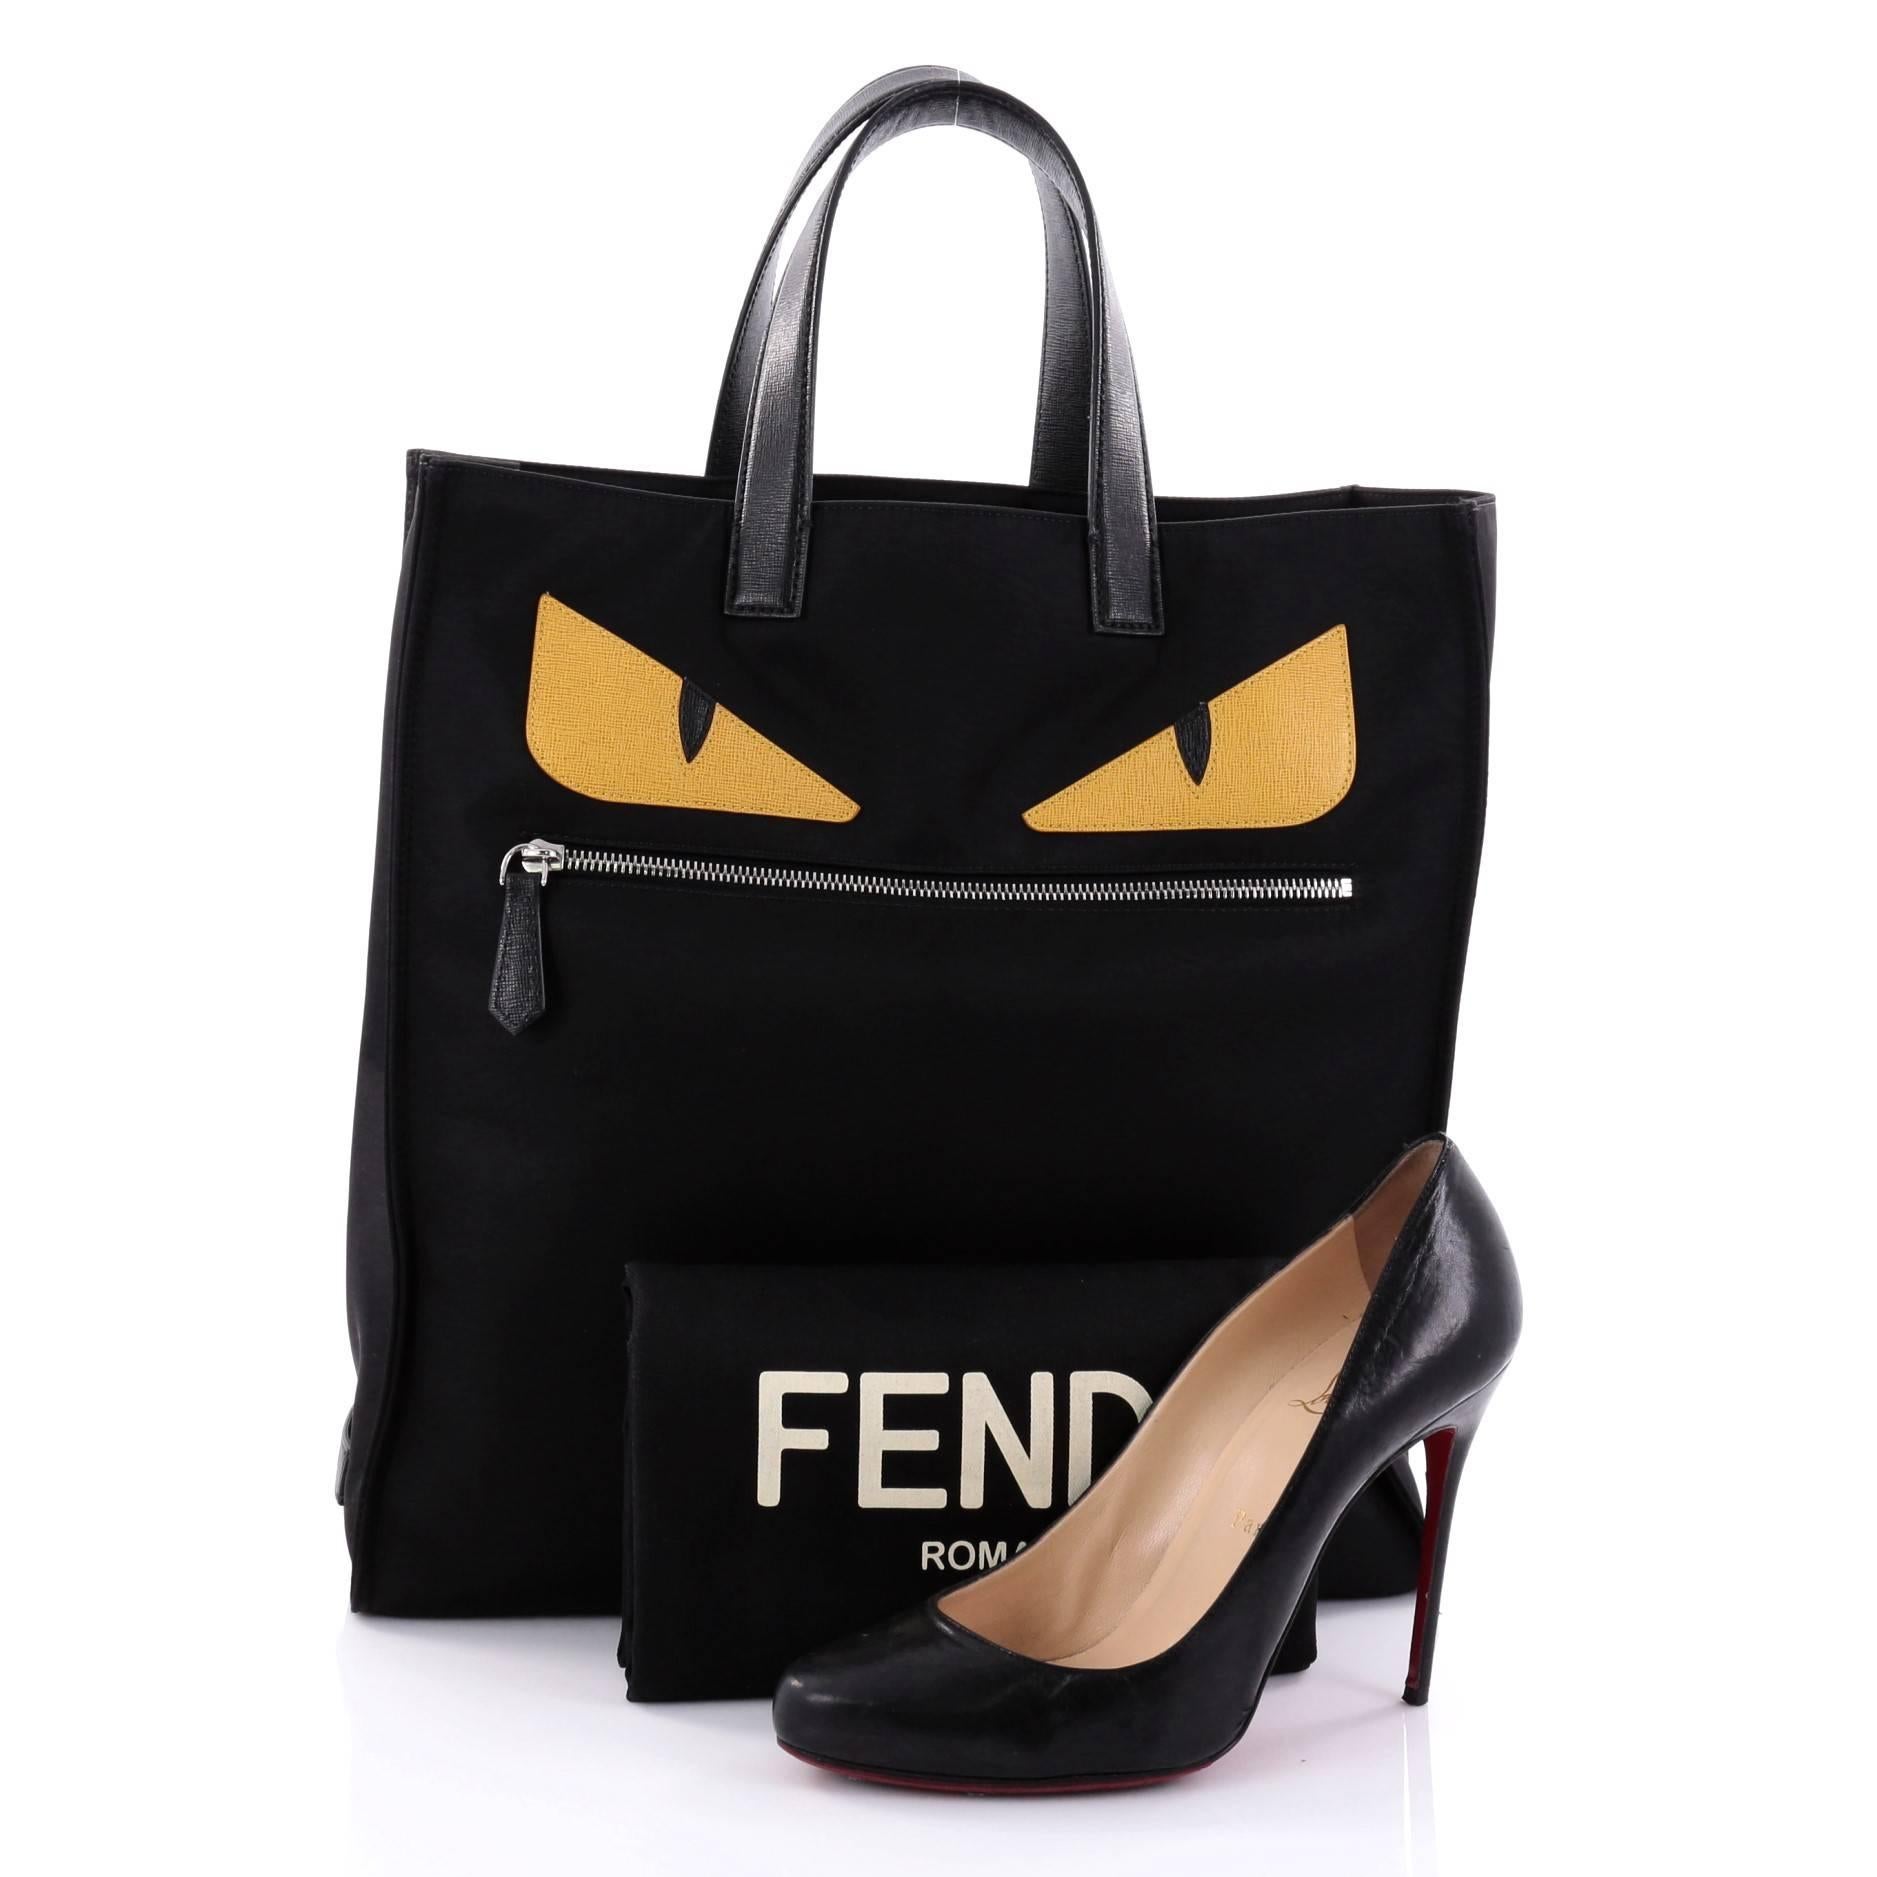 This authentic Fendi Monster Tote Nylon is a stylishly bold, modern tote perfect for any on-the-go moments. Crafted from black nylon, this easy-to-carry tote features dual flat black leather handles, eye-catching yellow monster eye applique design,